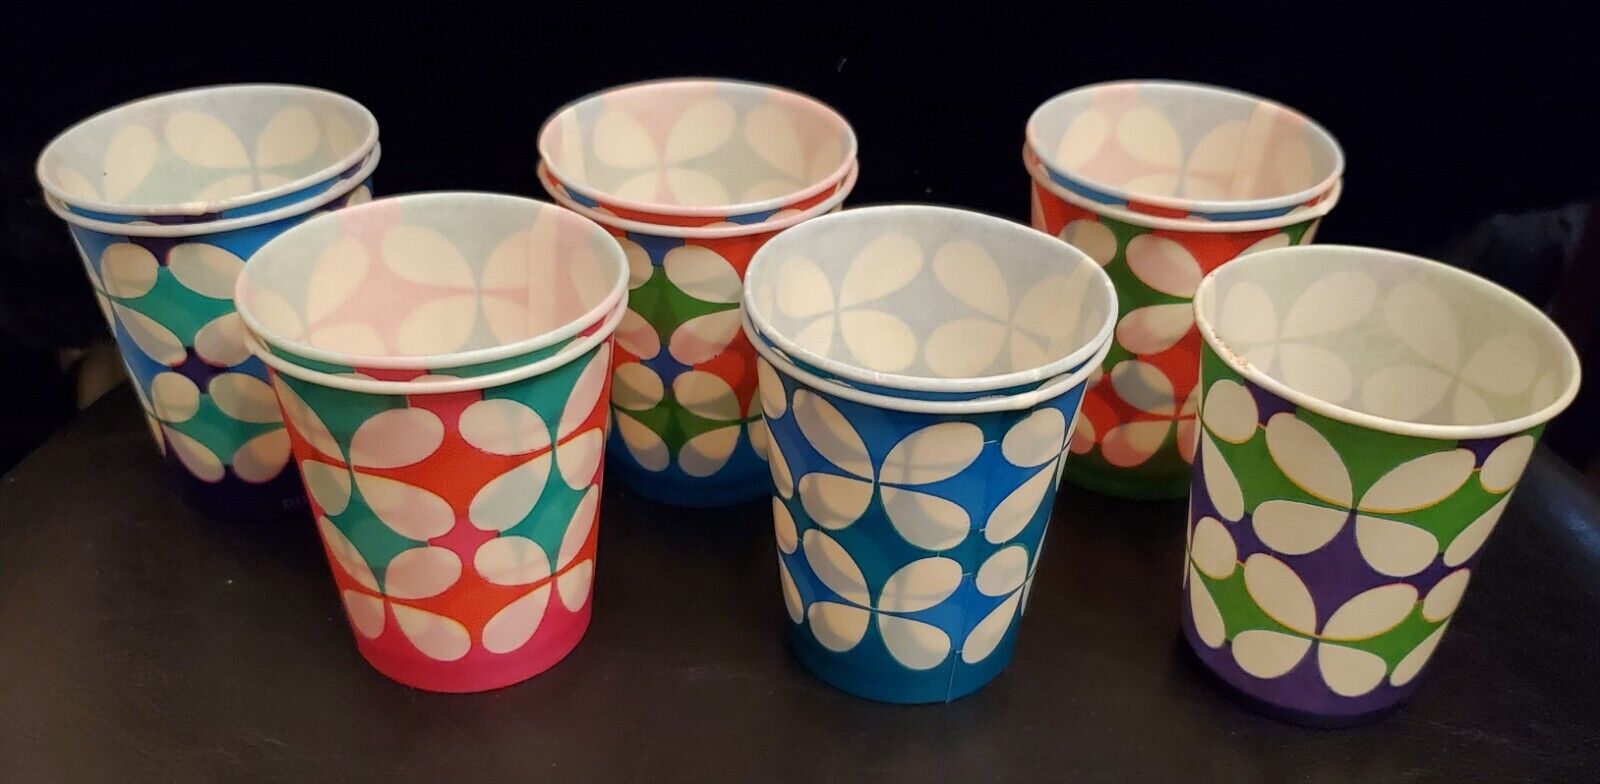 11 Vintage 70's 3oz. DIXIE CUPS #58 NOS Brand New Butterfly Pattern RARE MCM